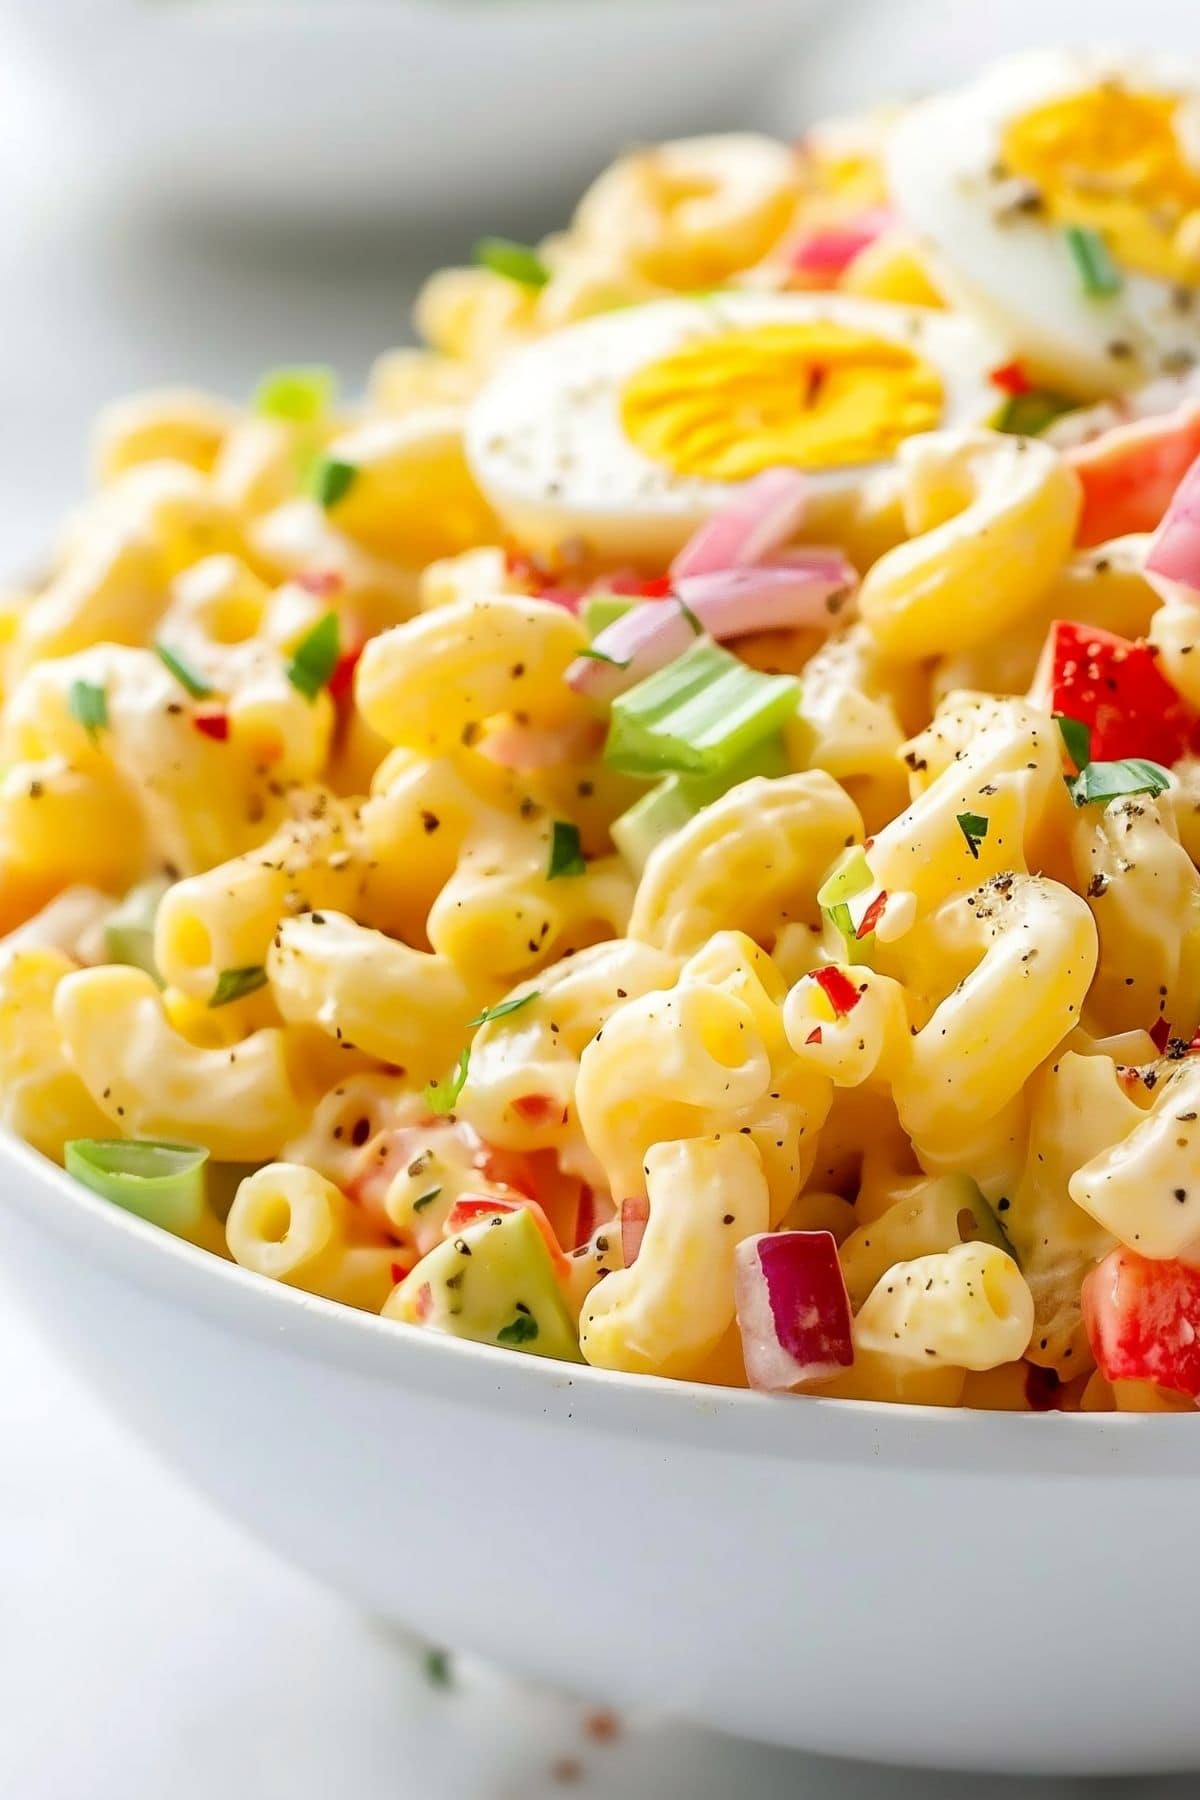 Super Close Up of Amish Macaroni Salad with Noodles, Sauce, Celery, Red Onion, Peppers, and Hard Boiled Egg